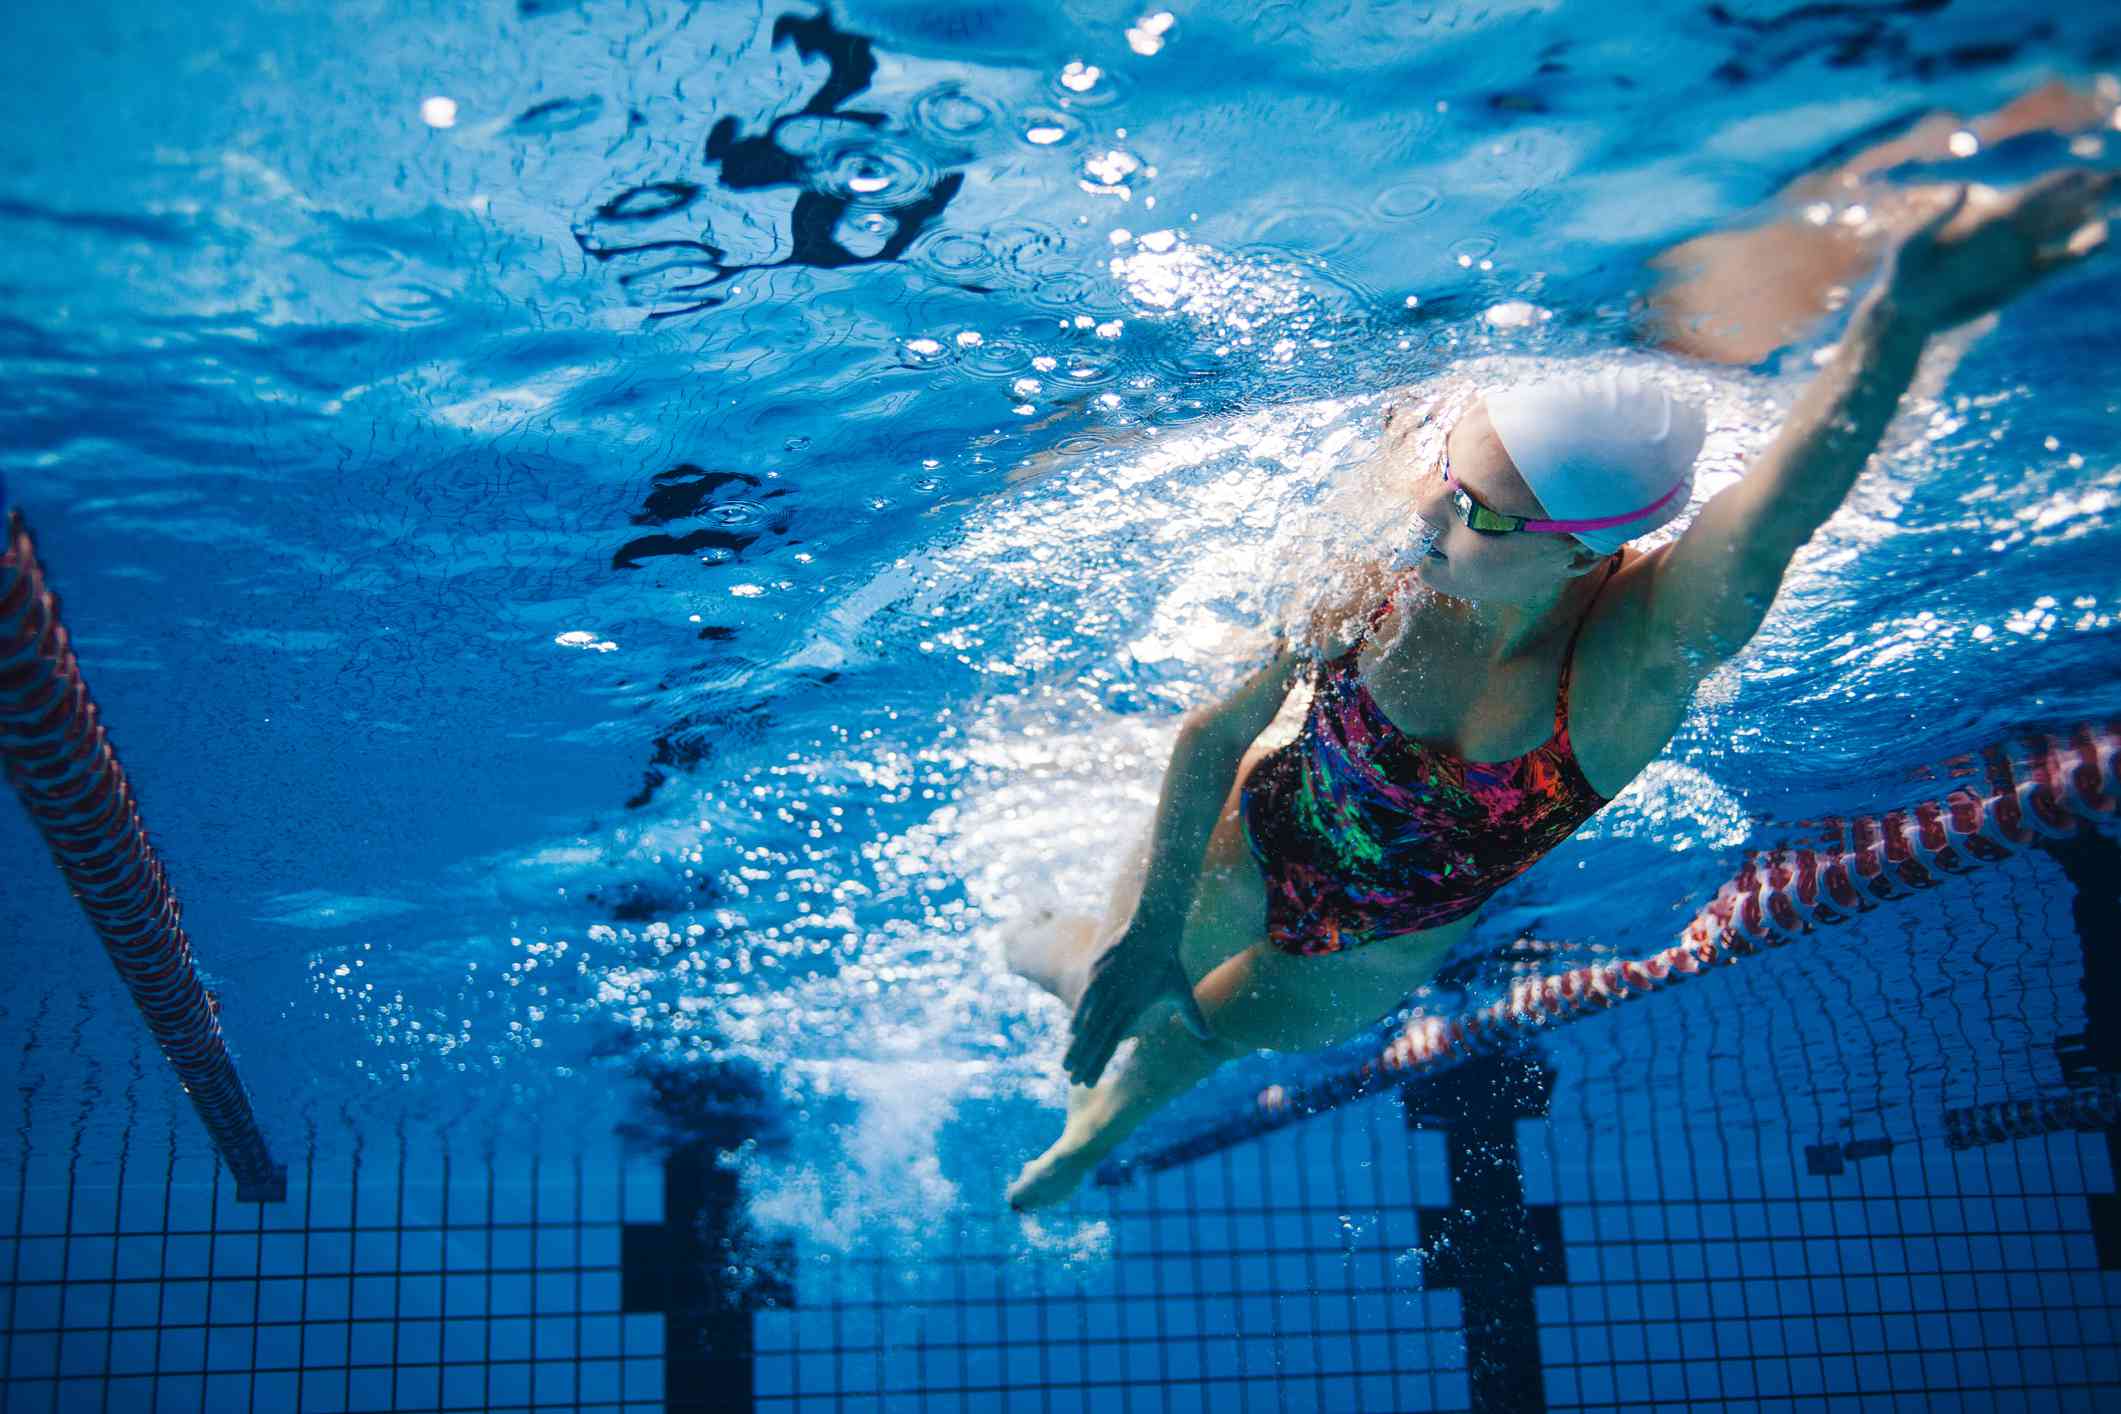 How Many Calories Does Swimming Burn?